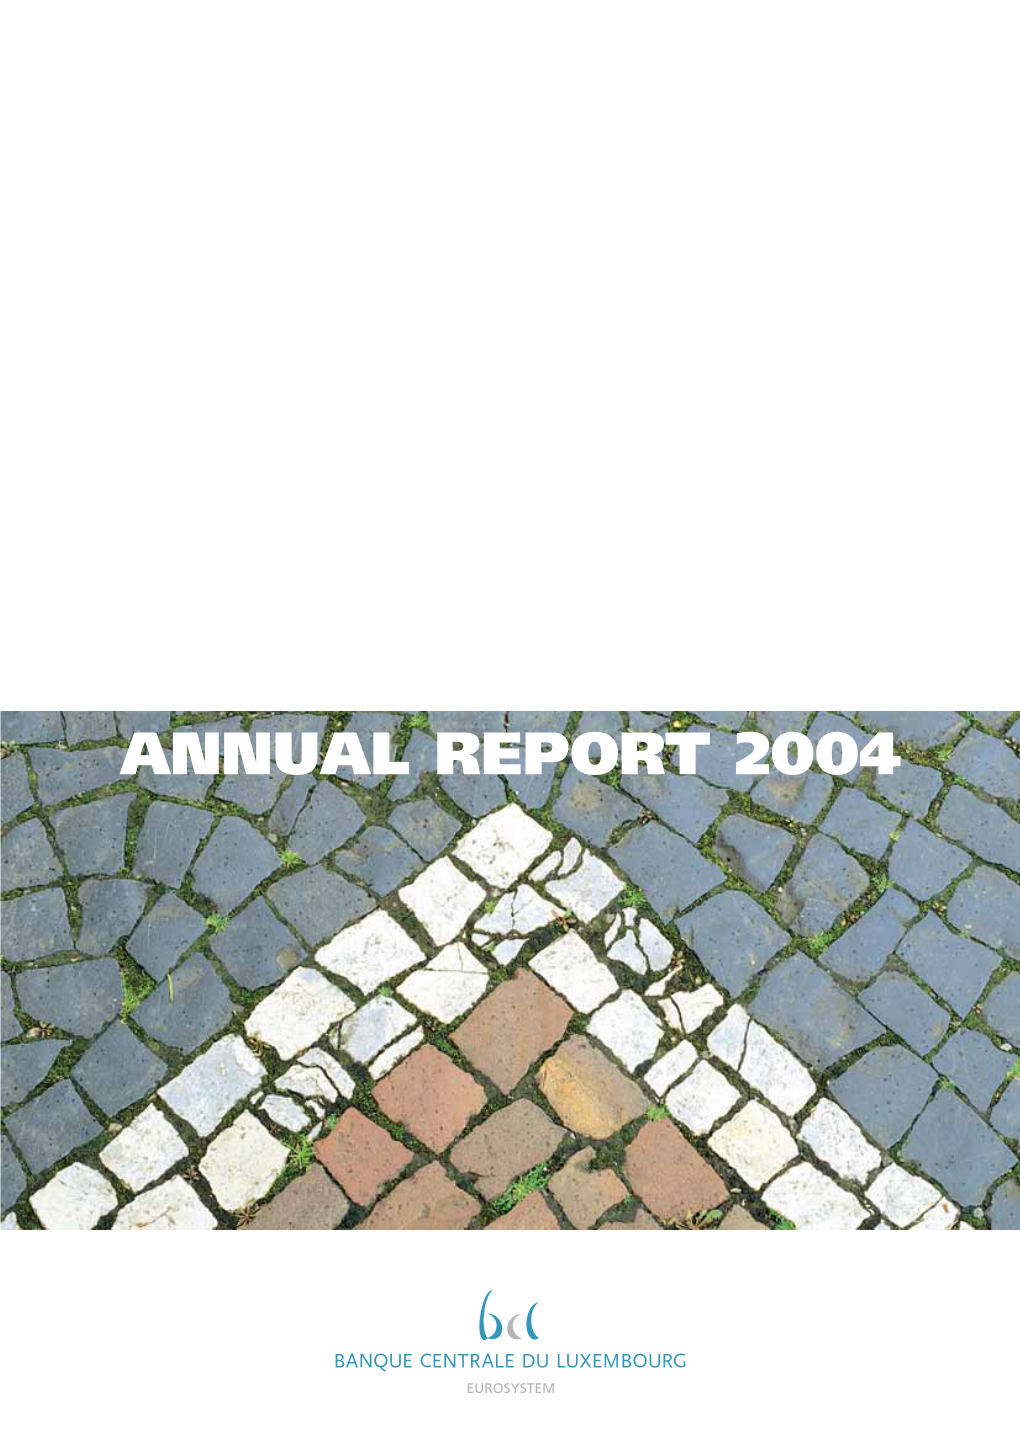 ANNUAL REPORT 2004 Reproduction for Educational and Non Commercial Purposes Is Permitted Provided That the Source Is Acknowledged